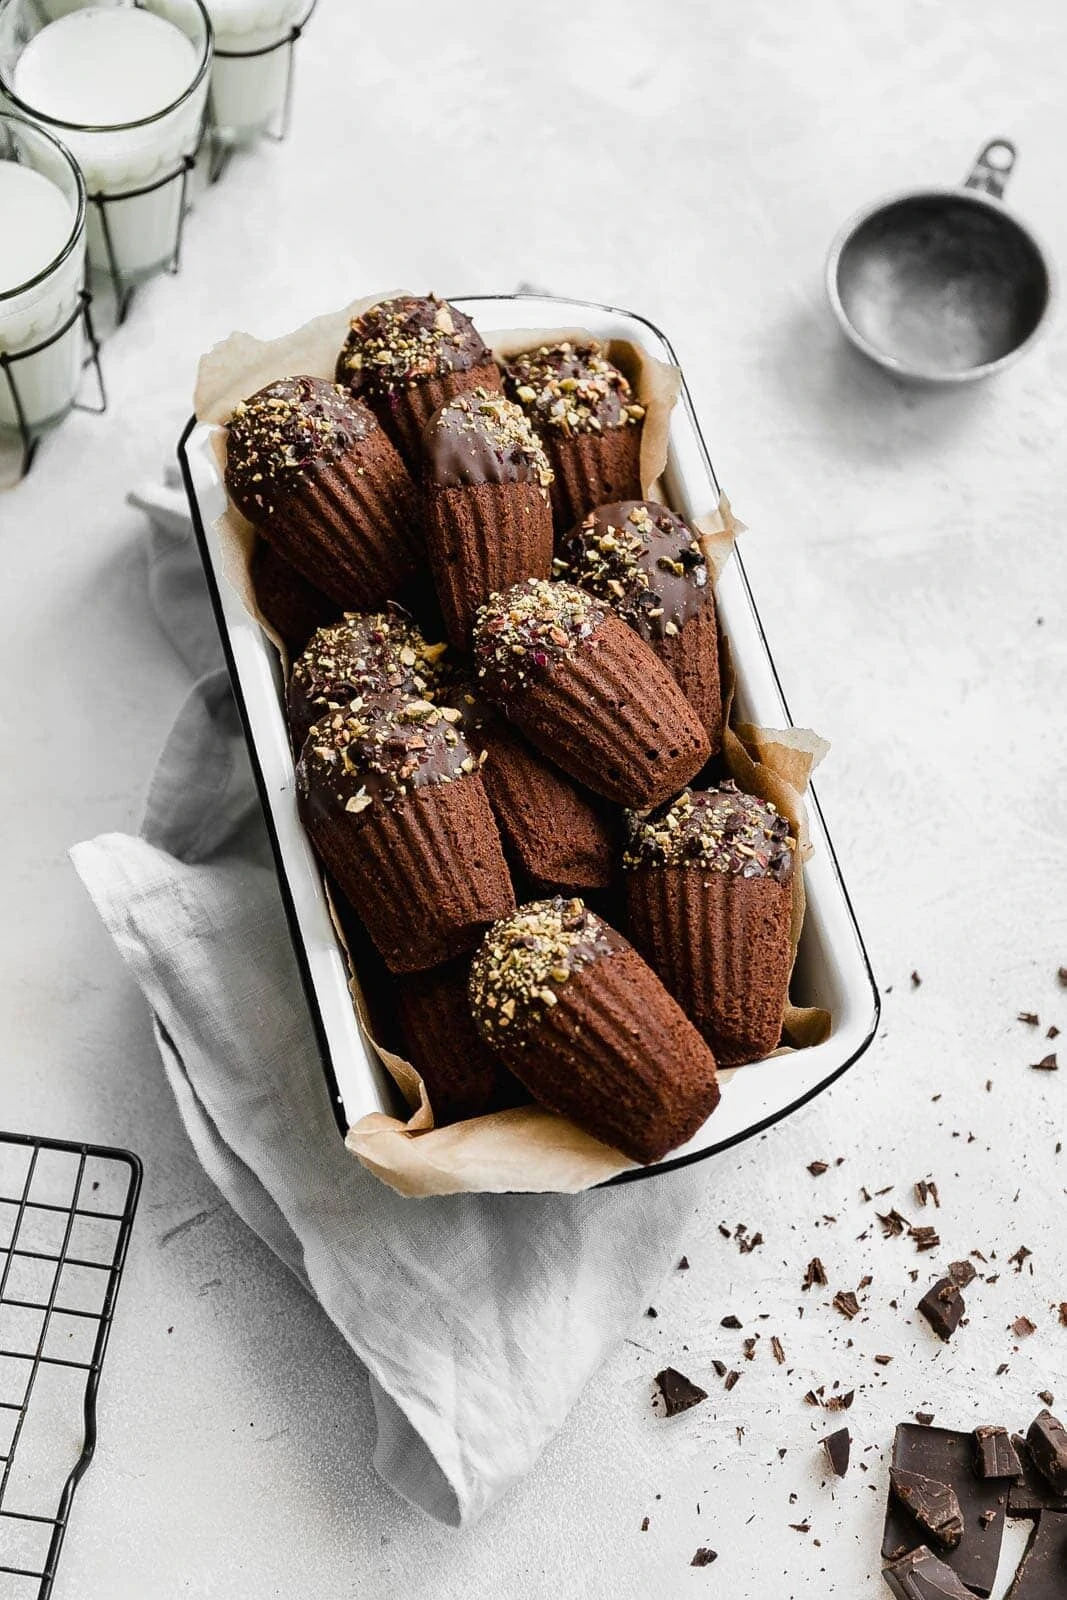 Simple and elegant, these chocolate dipped Chocolate Madeleines are almost too pretty to eat! But only almost, because they're also too good NOT to eat :)